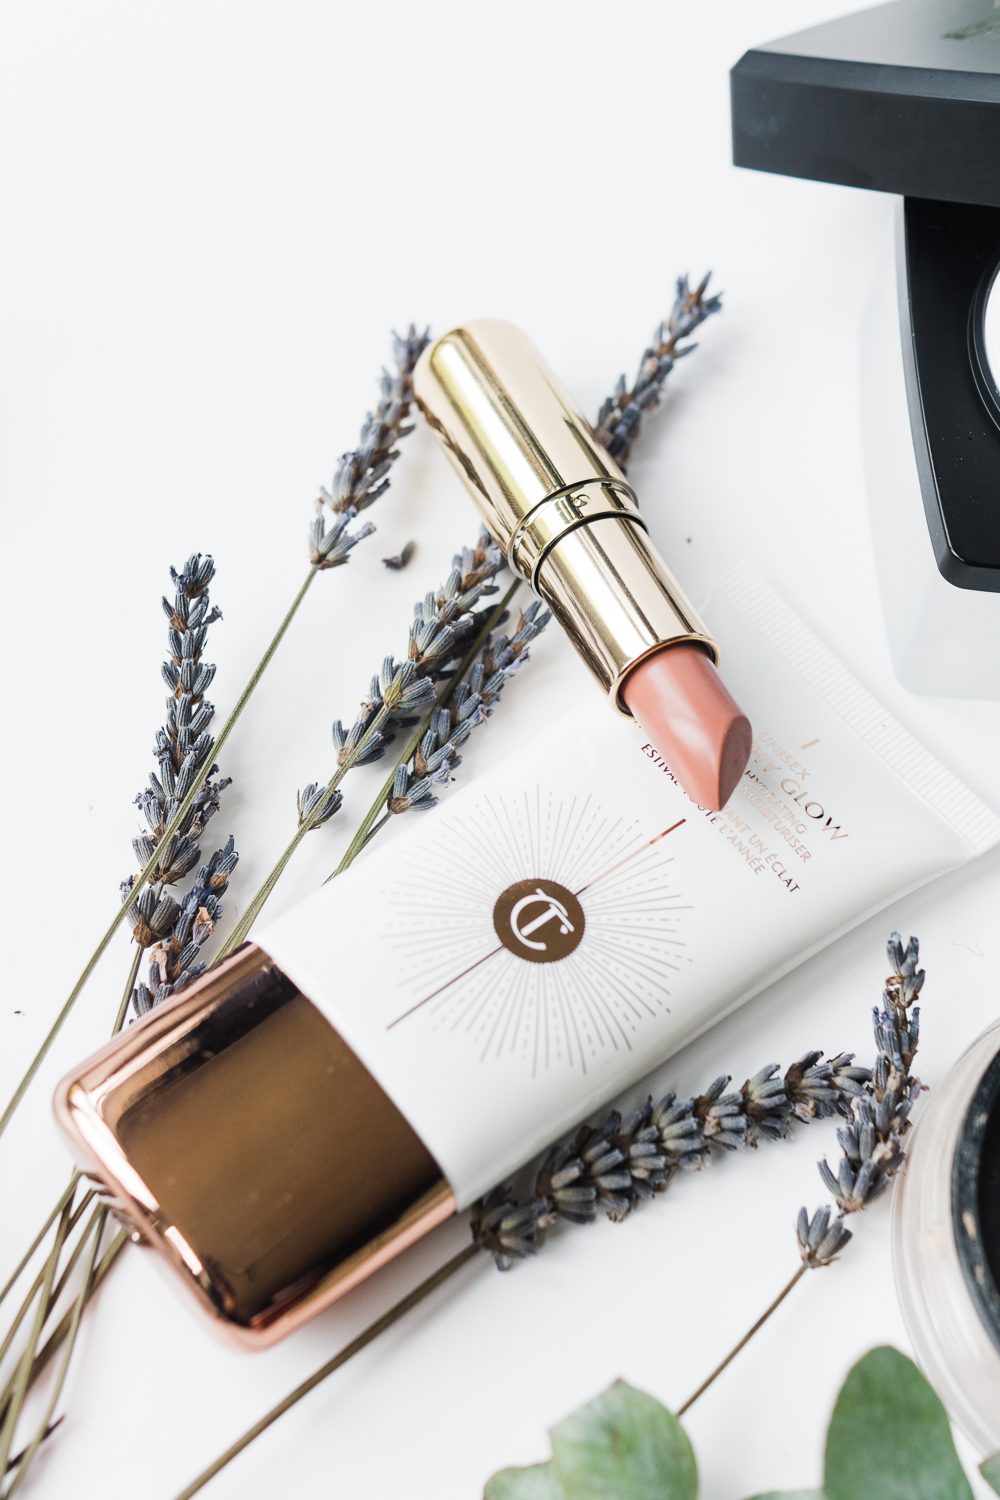 Charlotte-tilbury-unisex-healthy-glow-review-Barely-there-beauty-blog-photography